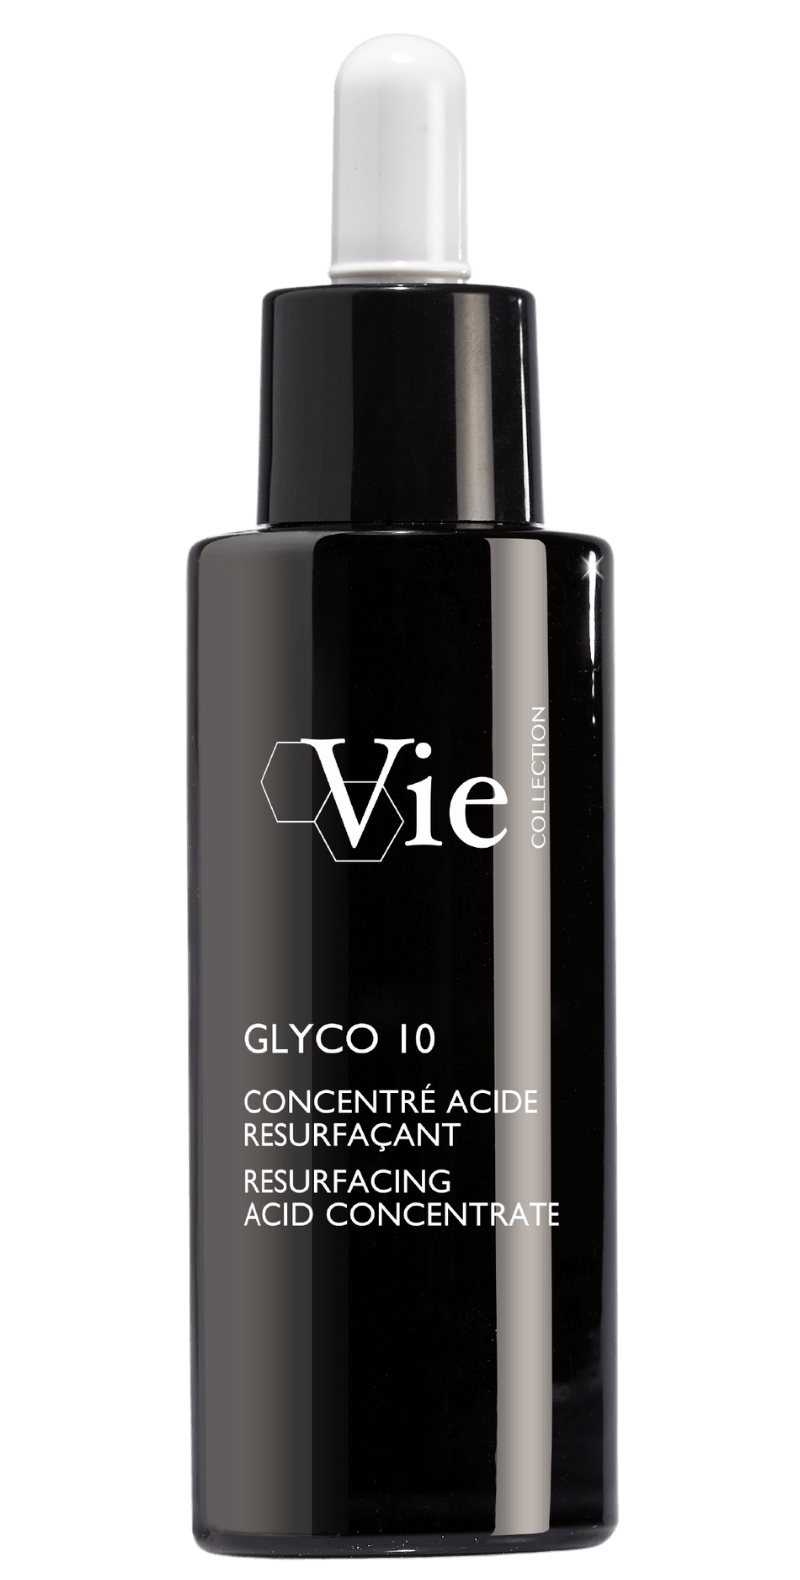 &#39;s Vie GLYCO 10 Resurfacing Acid Concentrate - Bellini&#39;s Skin and Parfumerie 